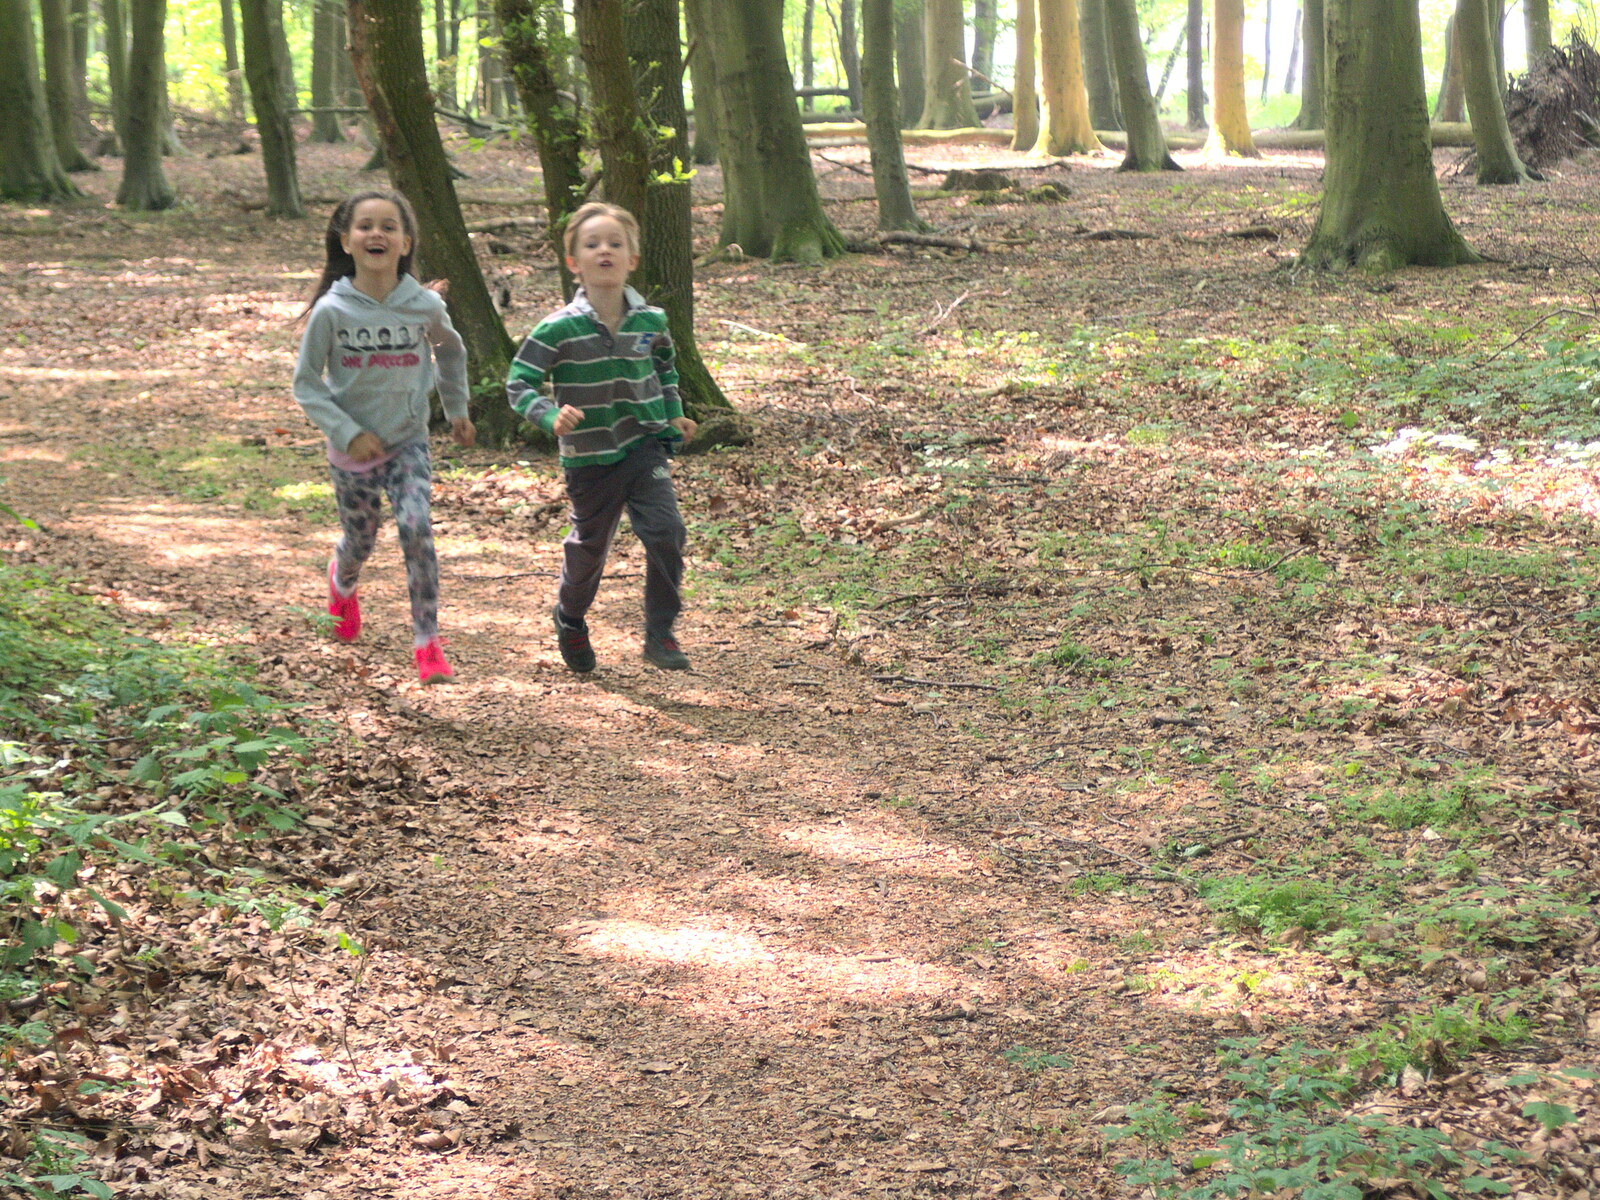 Harry and new friend Isobel run through the forest from Dower House Camping, West Harling, Norfolk - 27th May 2018